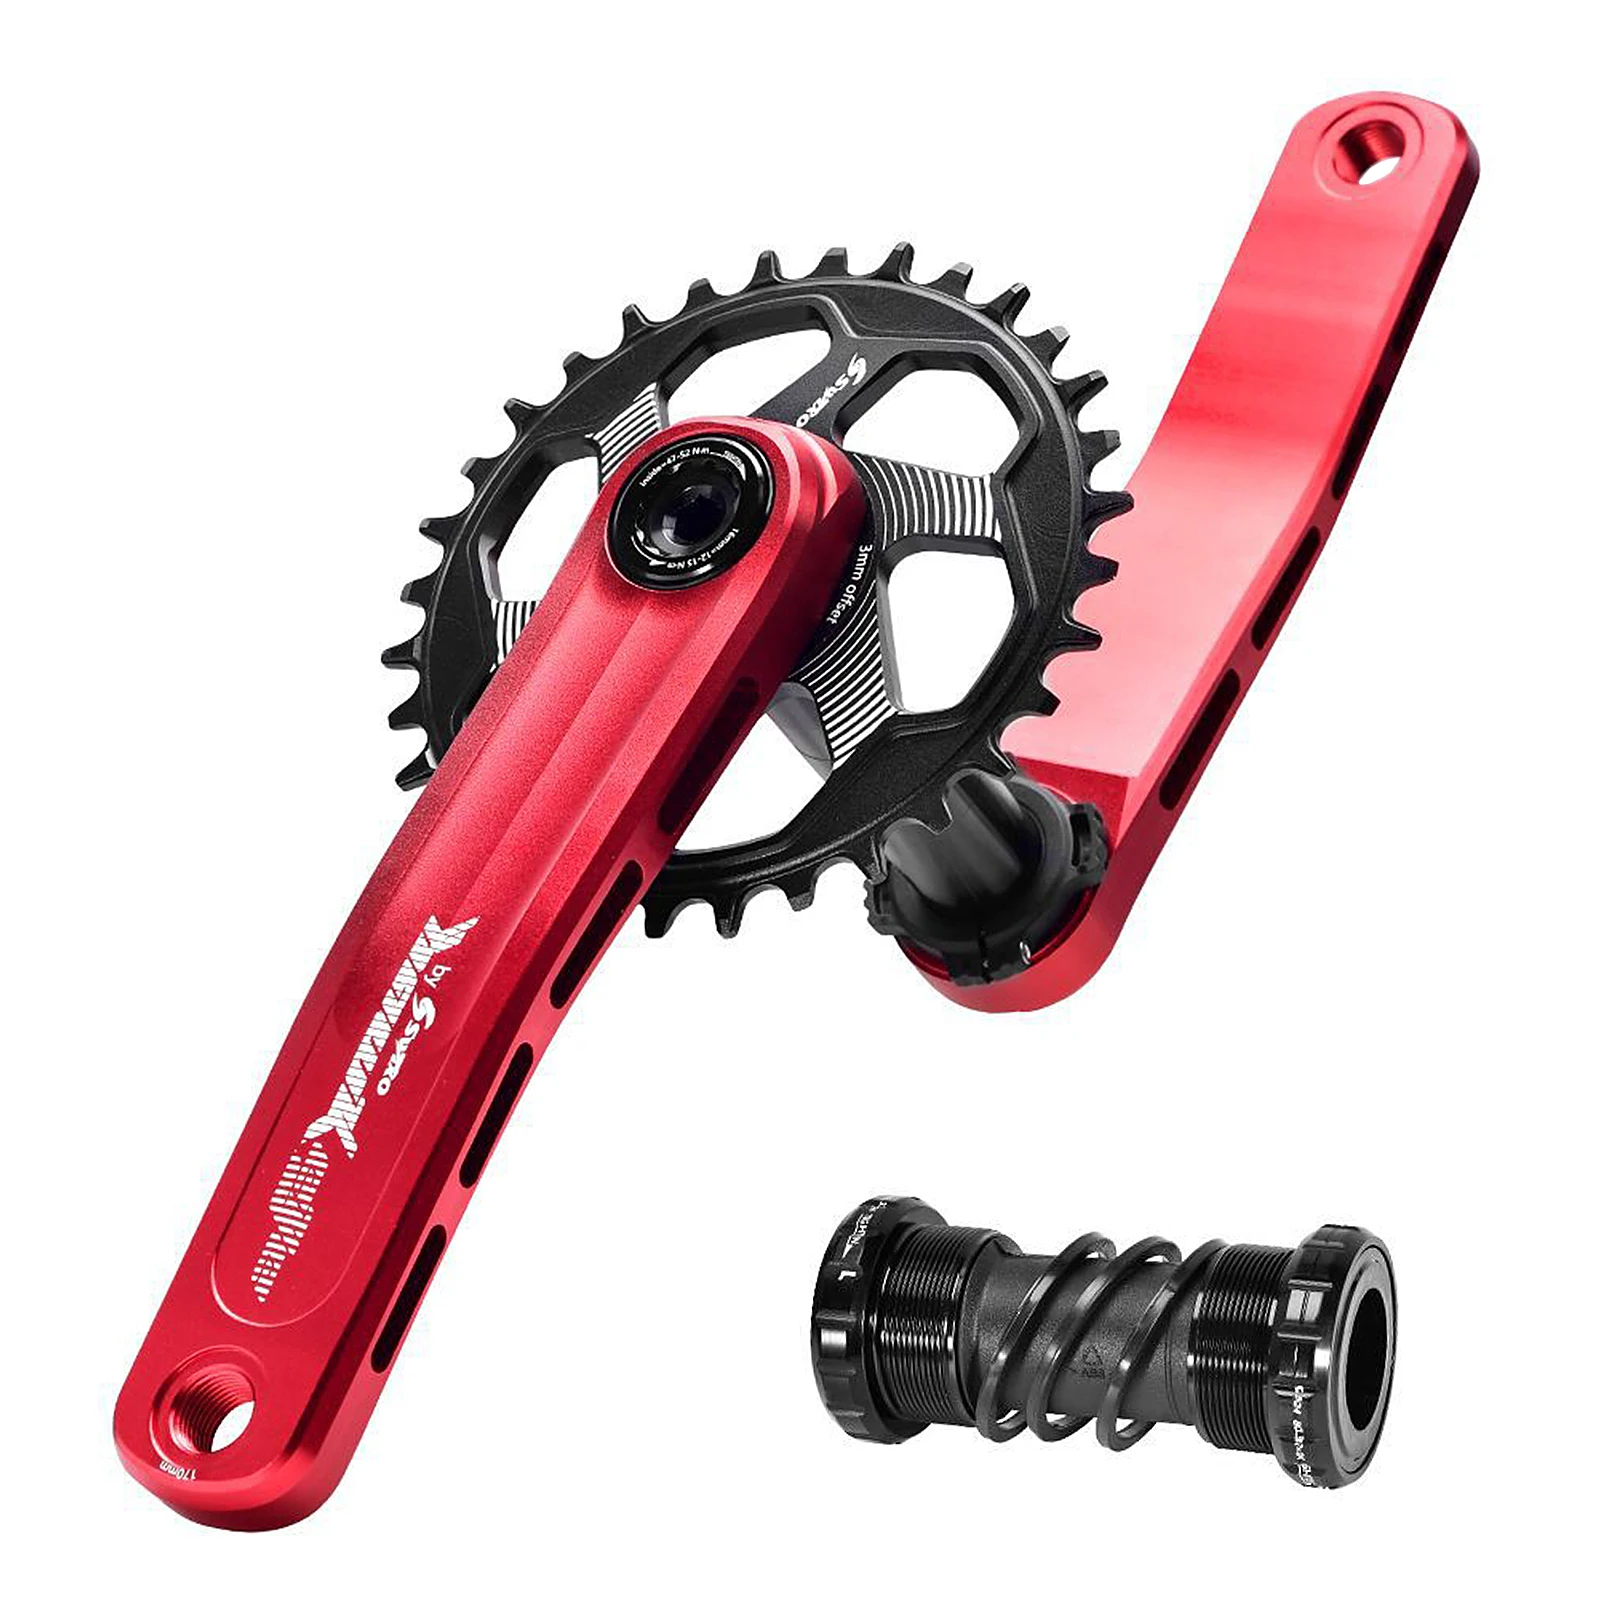 Mountain Bike Crankset 170mm MTB Bicycle Crank Arm Set with Bottom Bracket Chainring 30T/32T/34T/36T/38T Bike Part Replacement